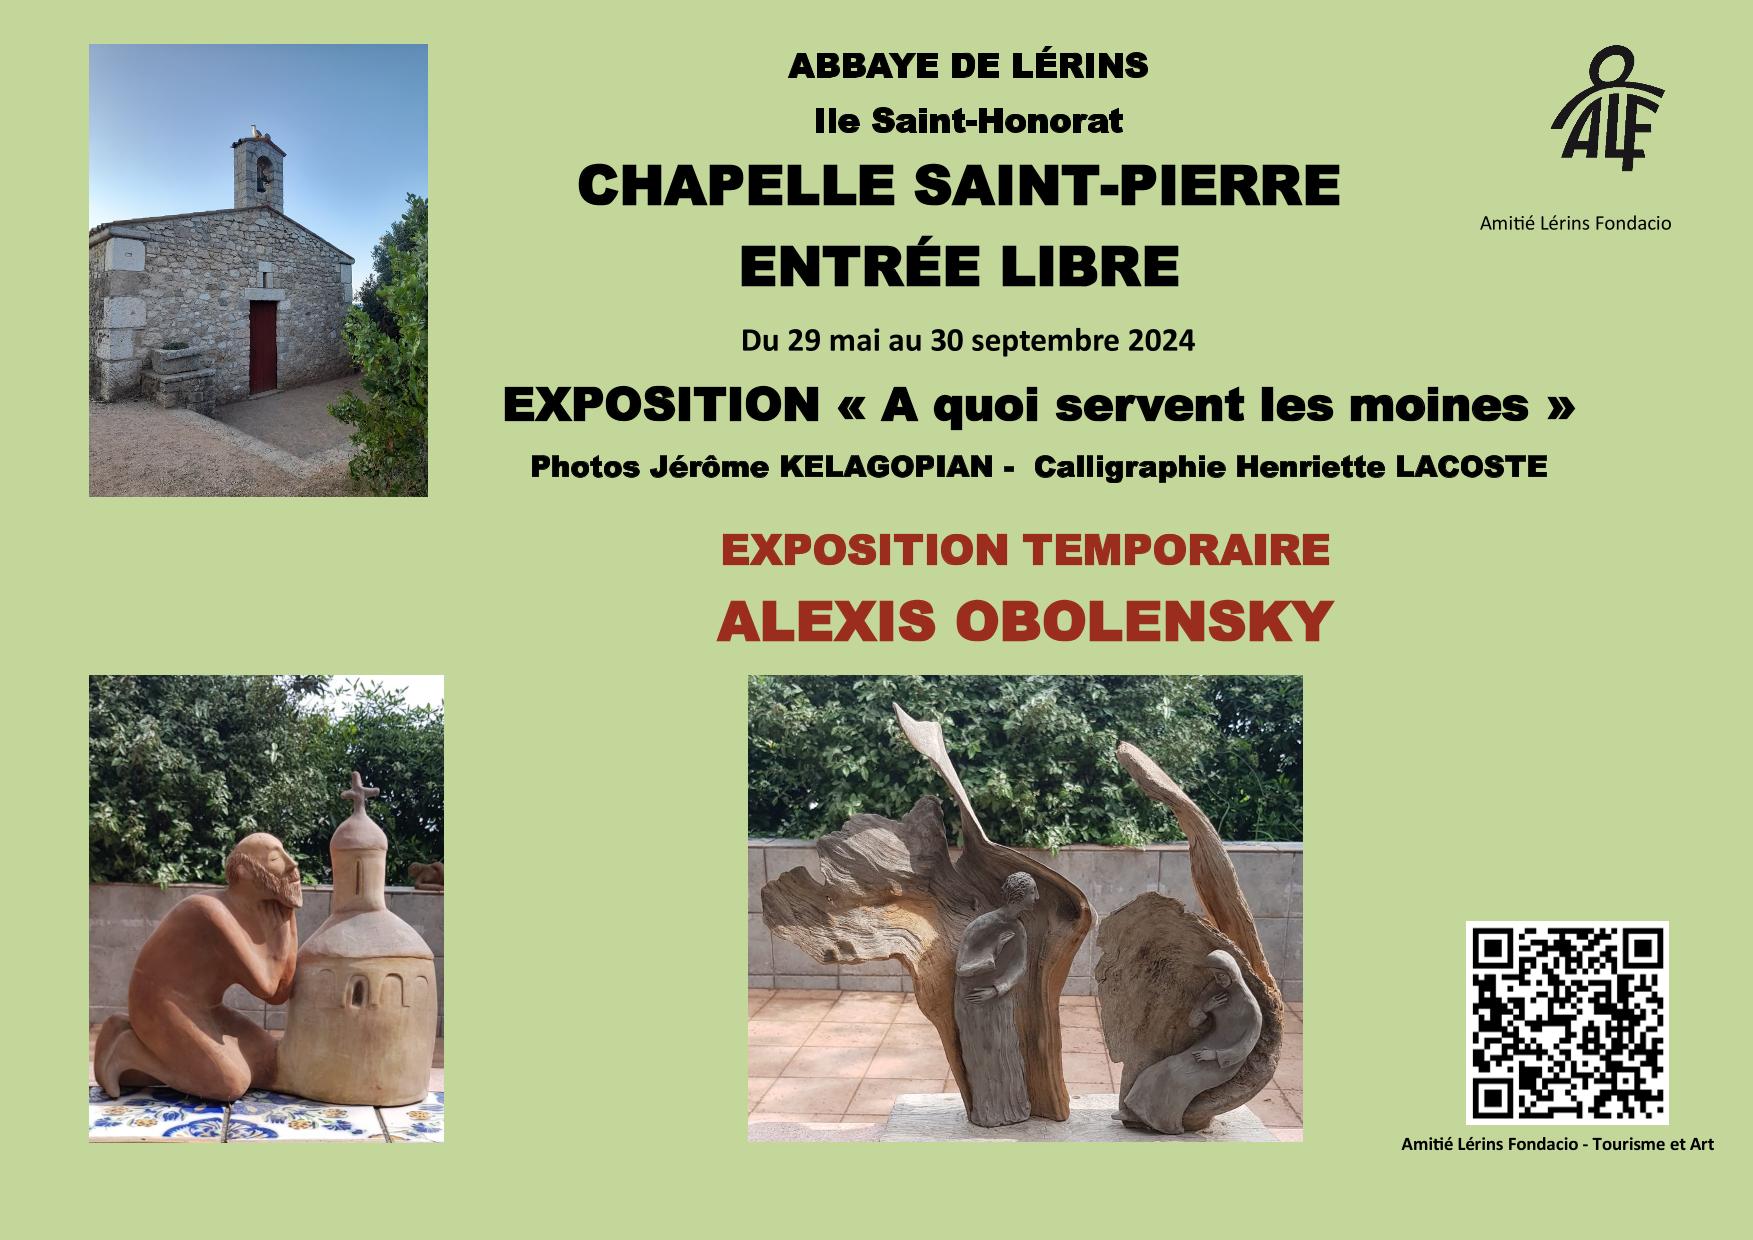 Expo affiche 24 1 1